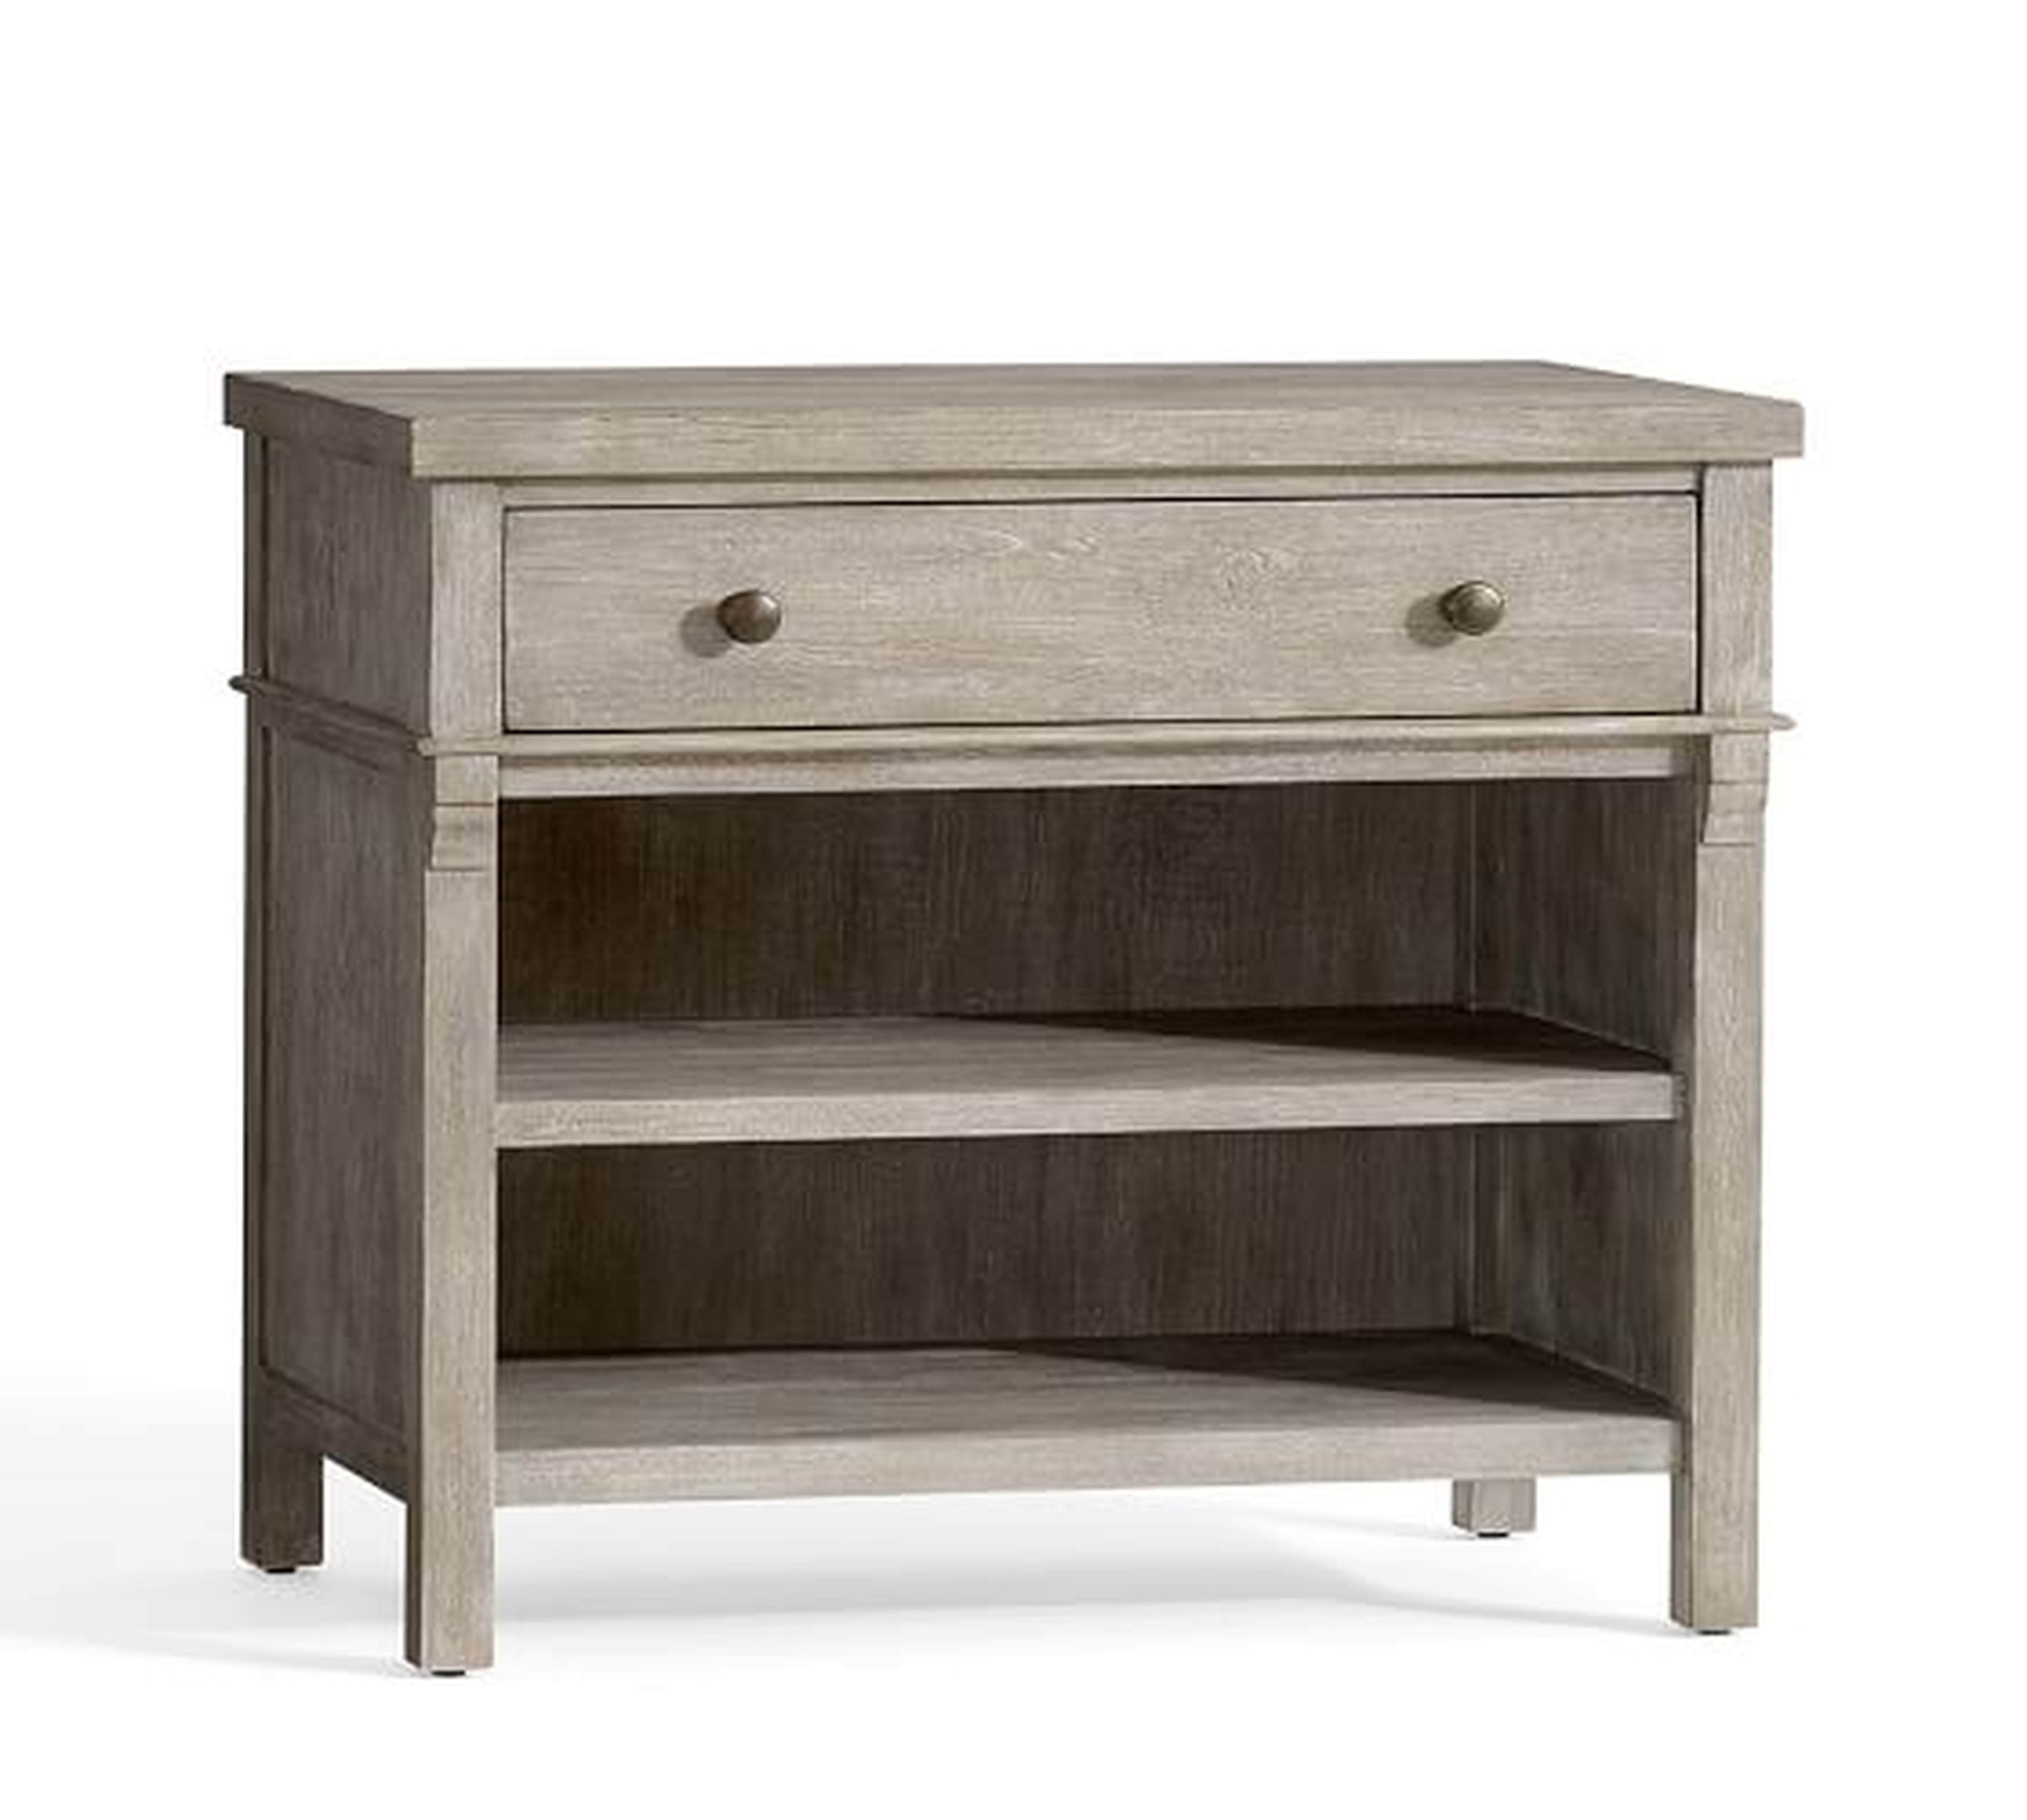 Toulouse Bedside Table - Pottery Barn